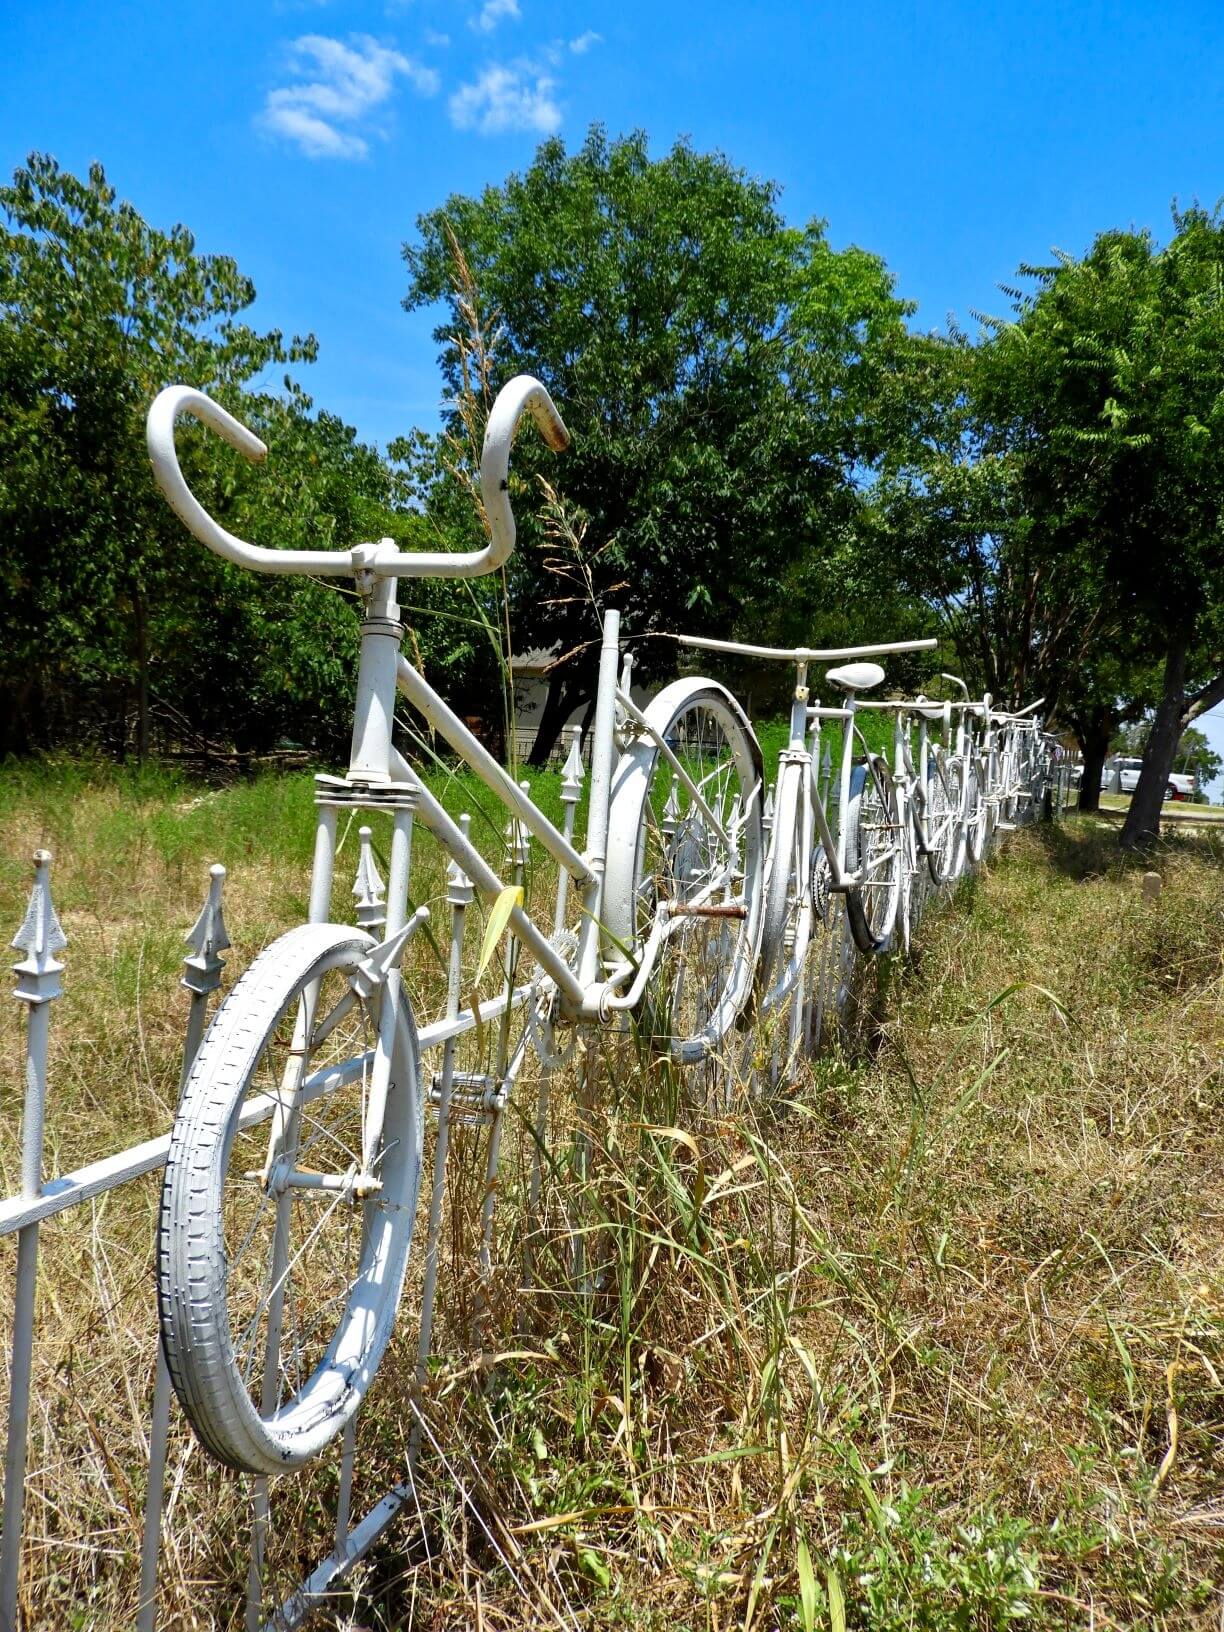 Salado: a white bicycle fence instead of a tradition picket fence